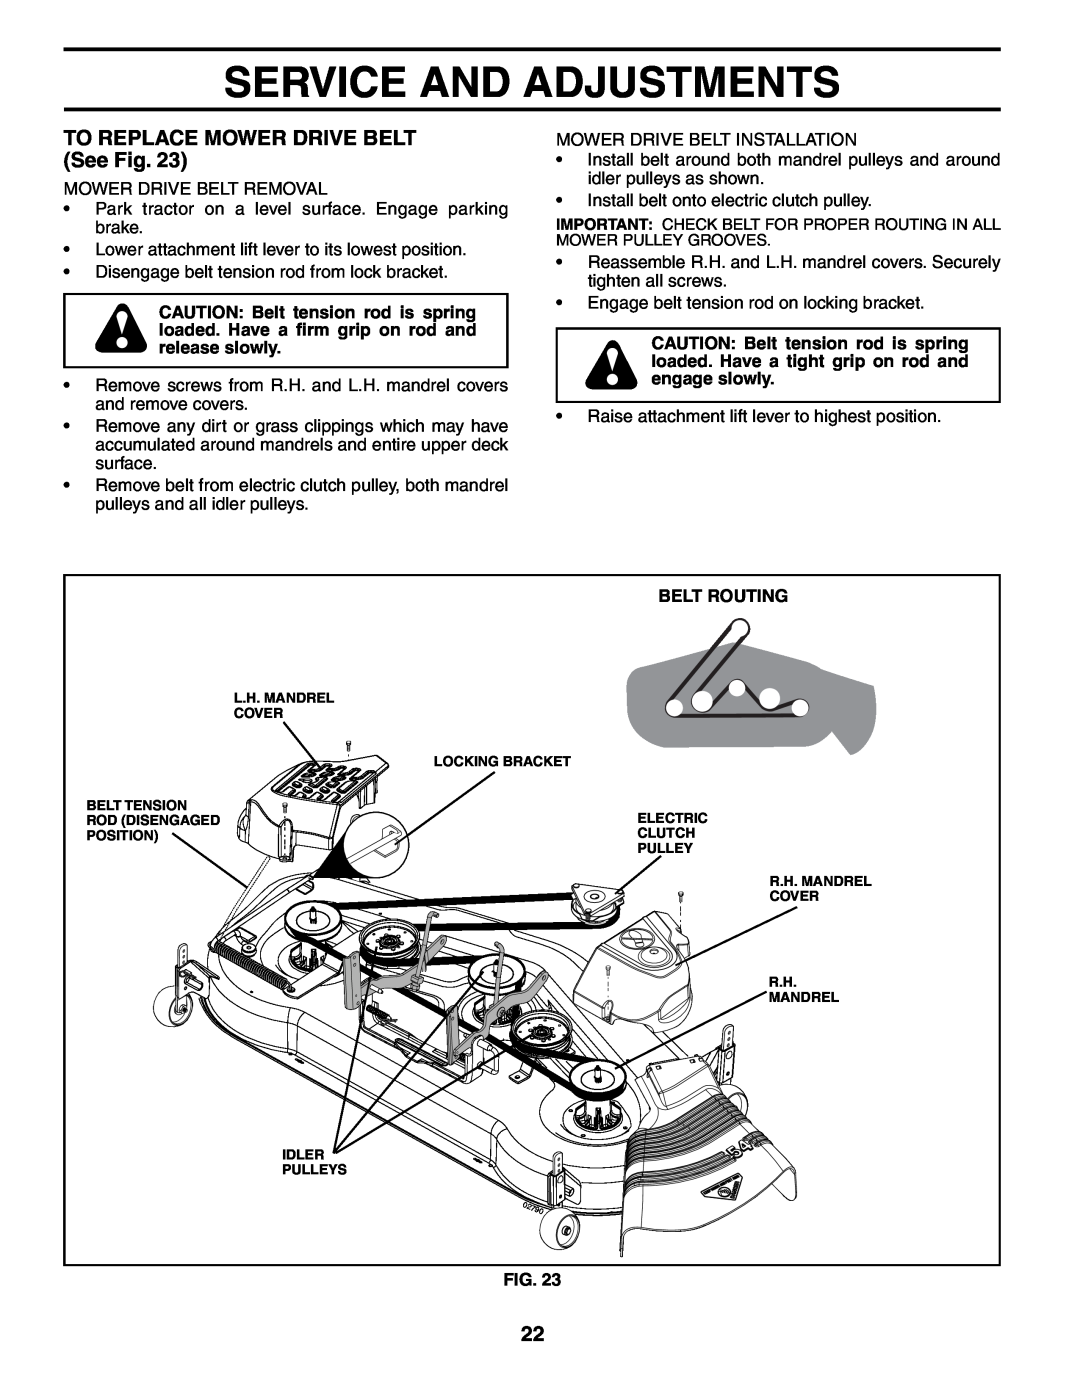 Husqvarna GT2254 owner manual TO REPLACE MOWER DRIVE BELT See Fig, Service And Adjustments, Belt Routing 